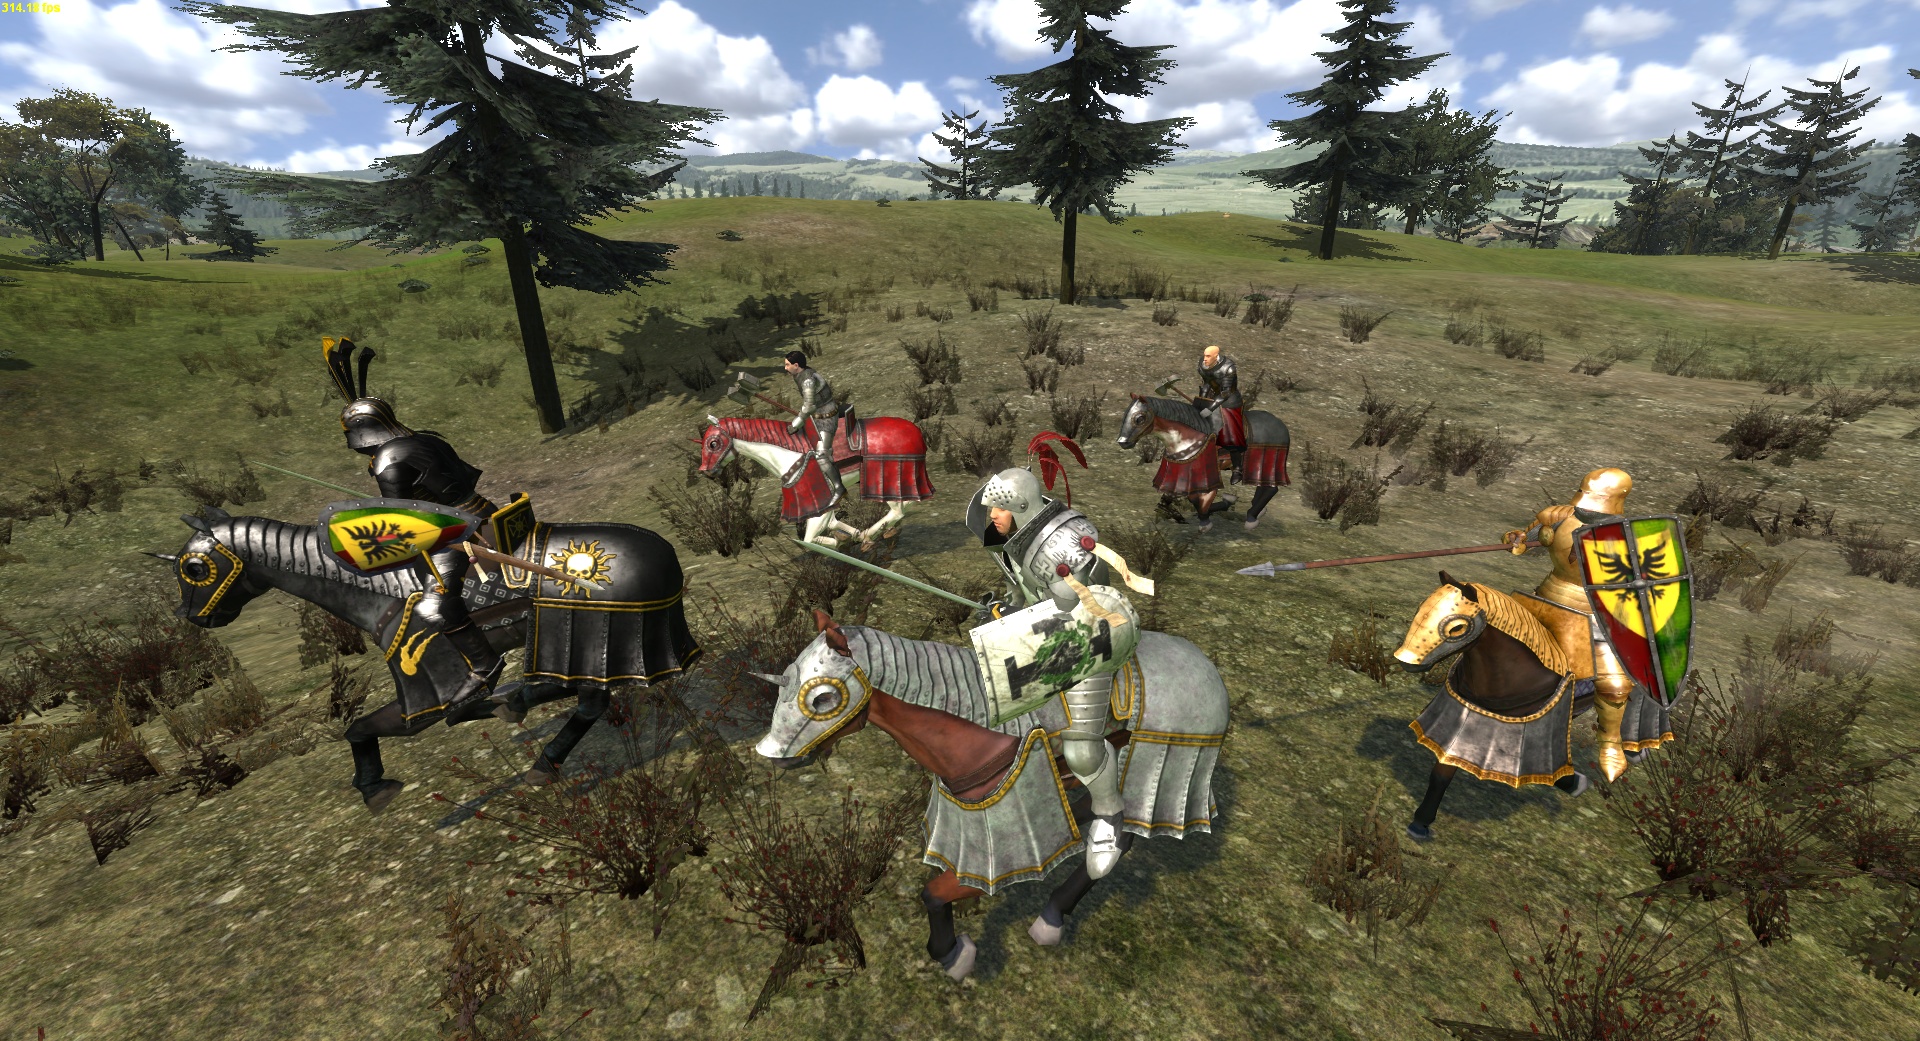 Warband warsword. Warsword Conquest. Маунт блейд вархаммер. Mount and Blade Warsword Conquest. Mount and Blade Warband Warsword Conquest.